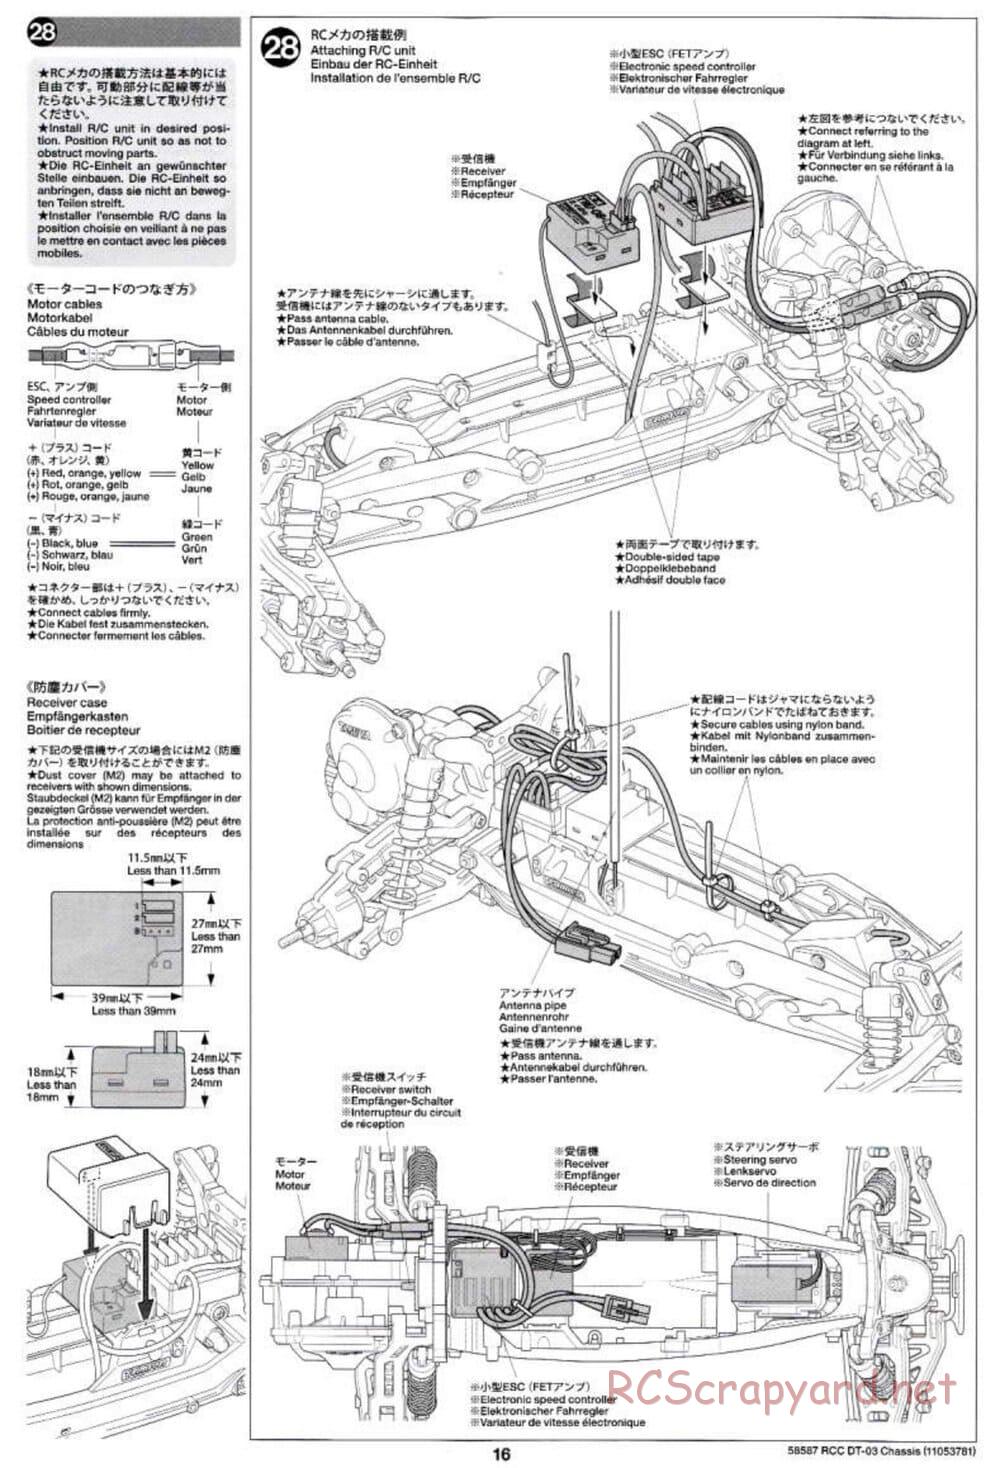 Tamiya - Neo Fighter Buggy Chassis - Manual - Page 16